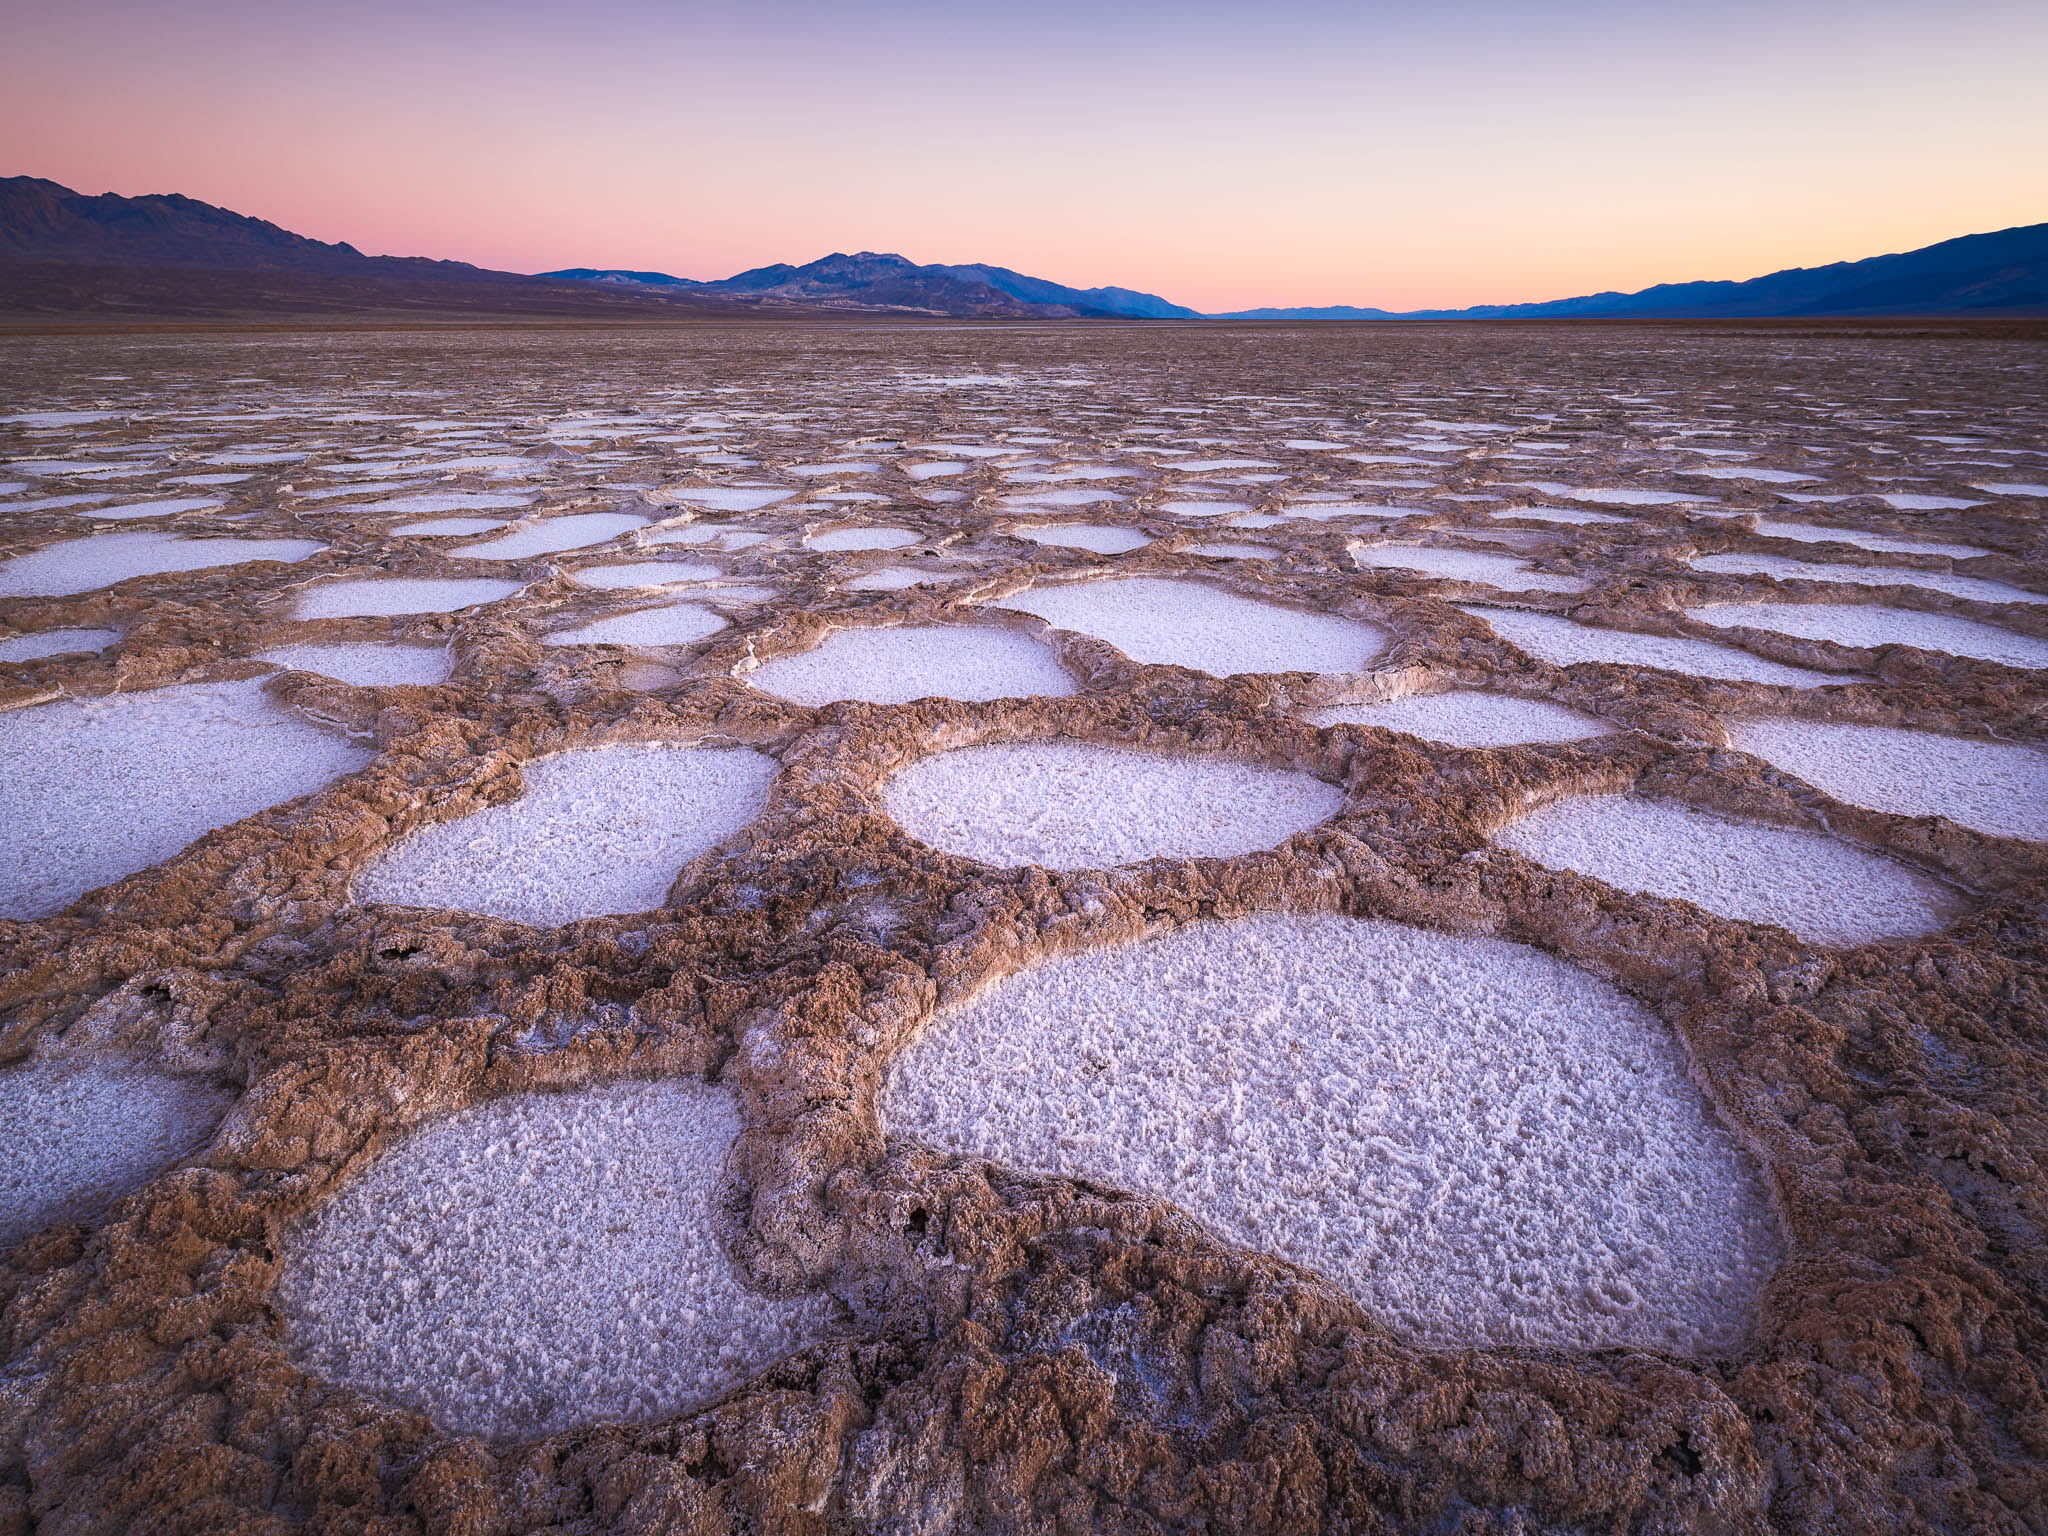 twilight glow after sunset on cottonball basin in death valley national park